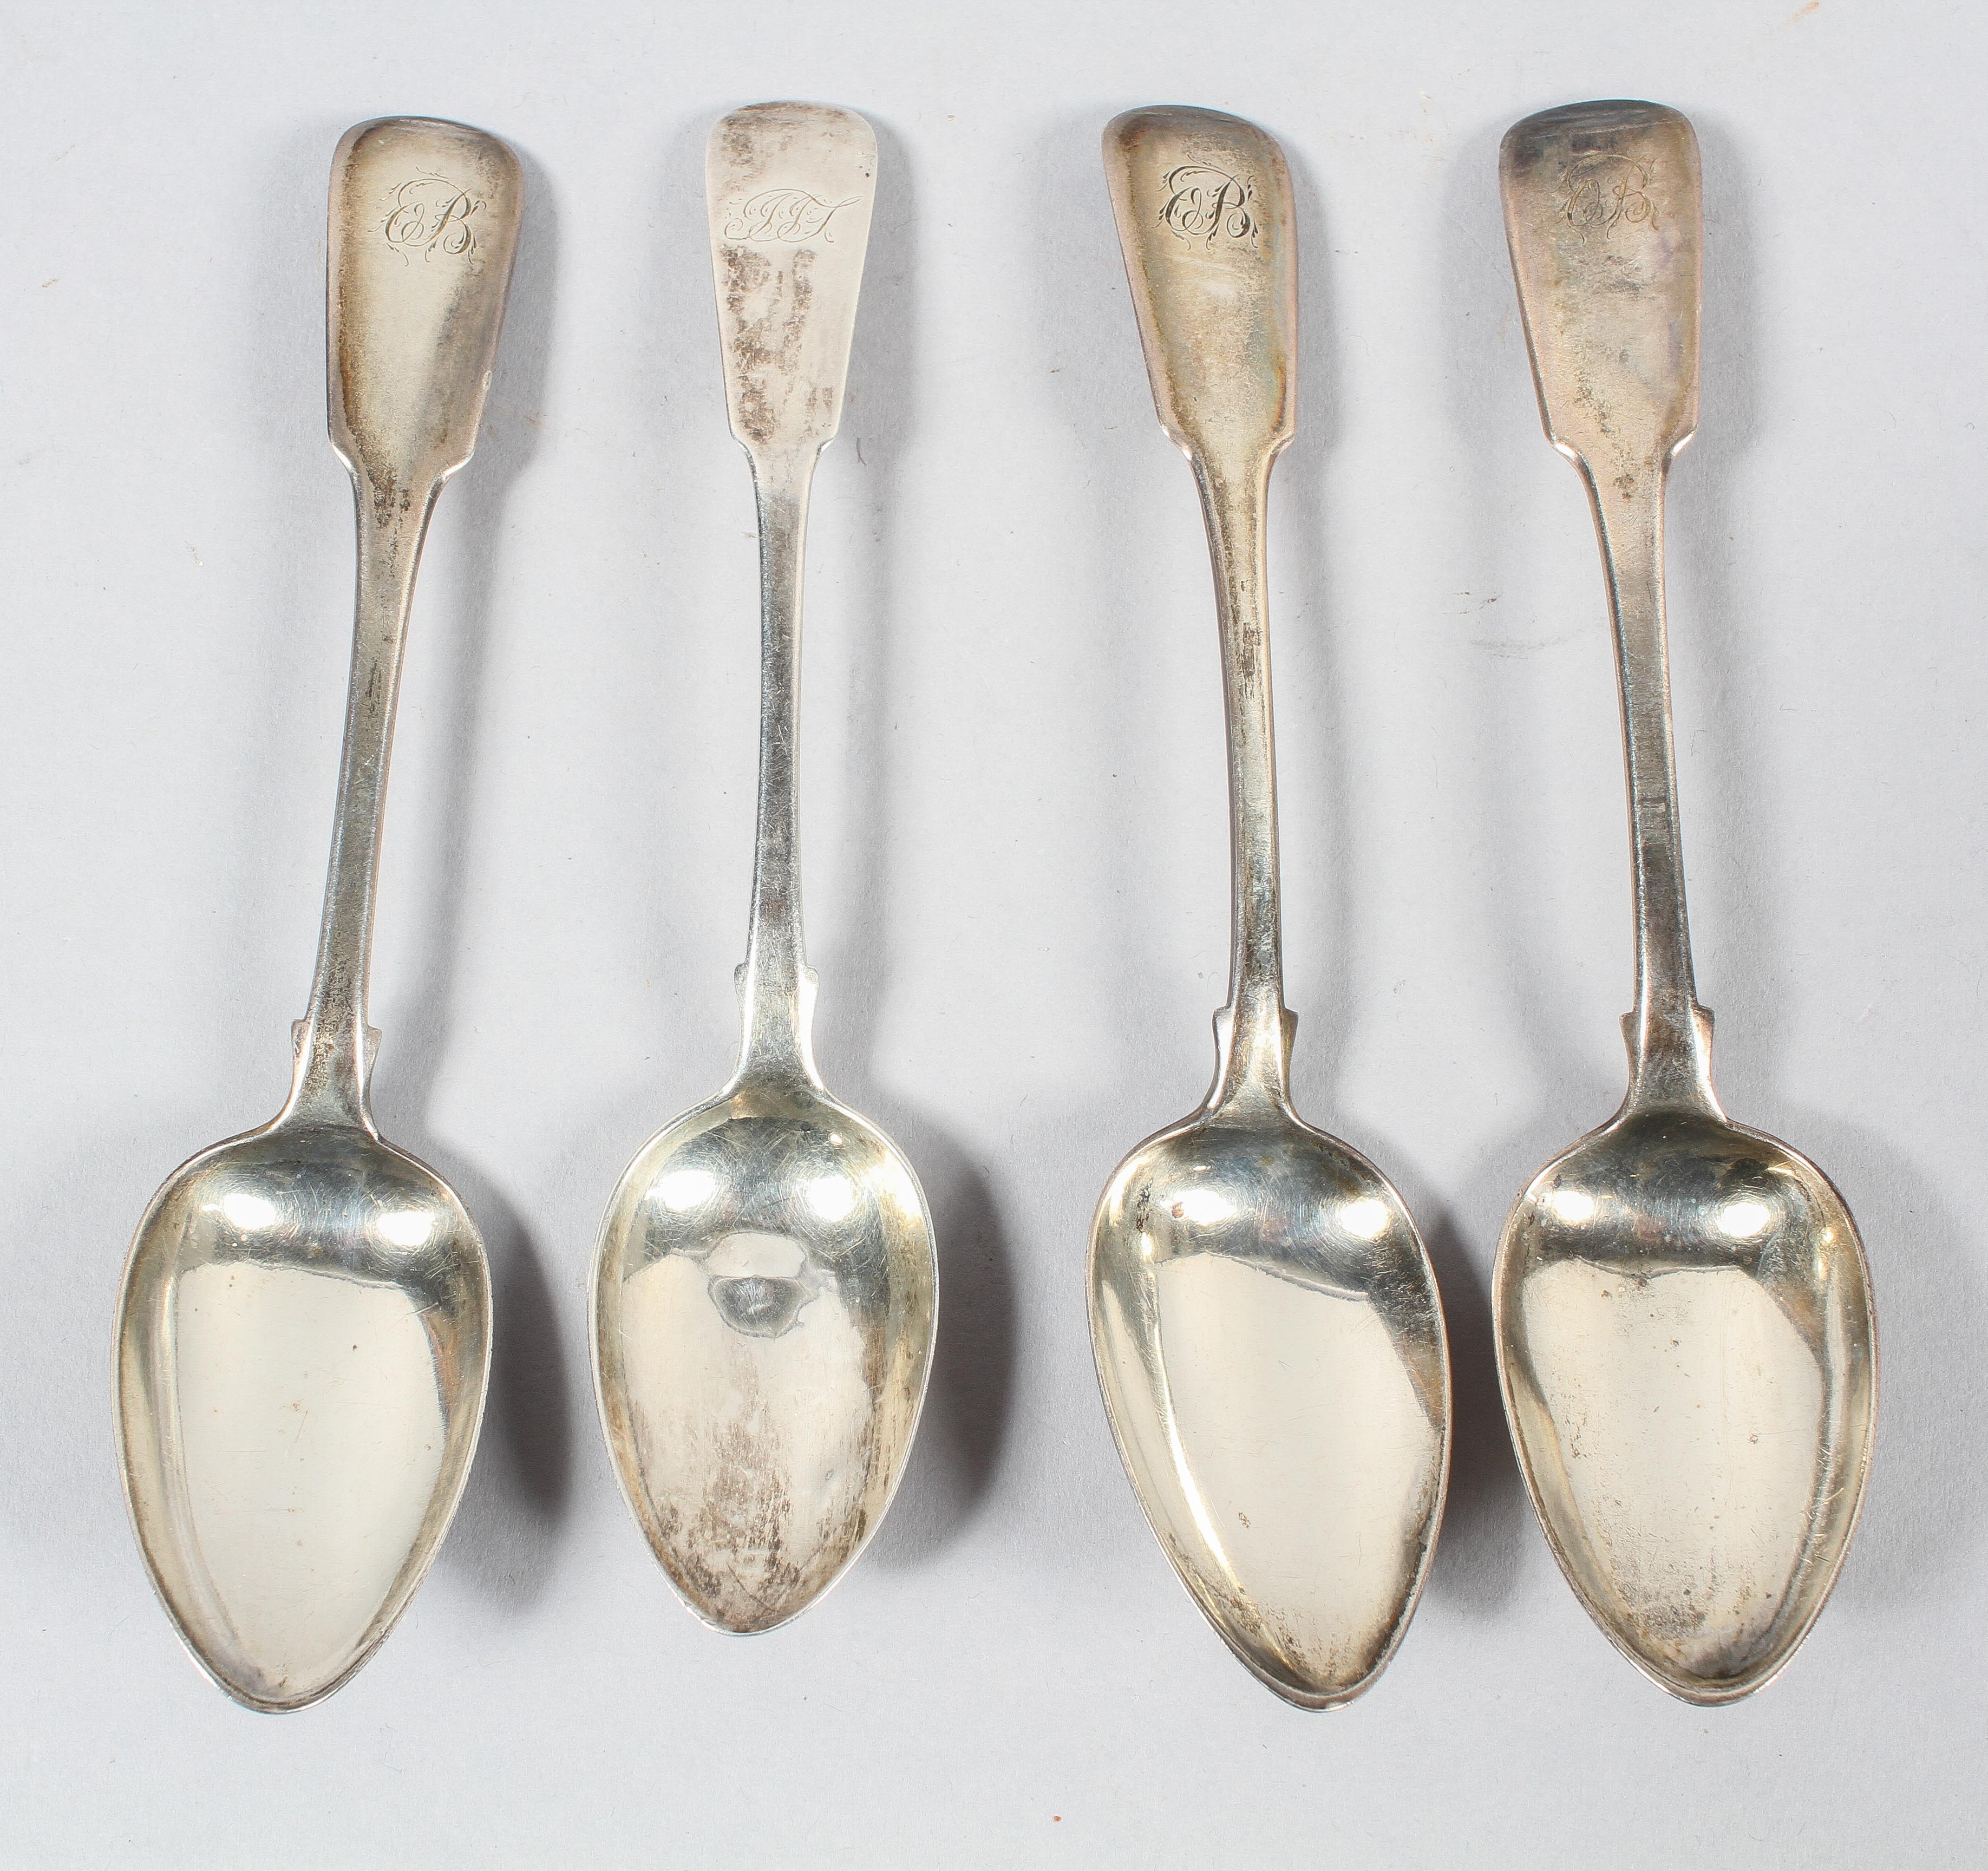 Two fiddle pattern silver teaspoons, with rat tail bowls, Dublin 1823, 15cm high; with two others,